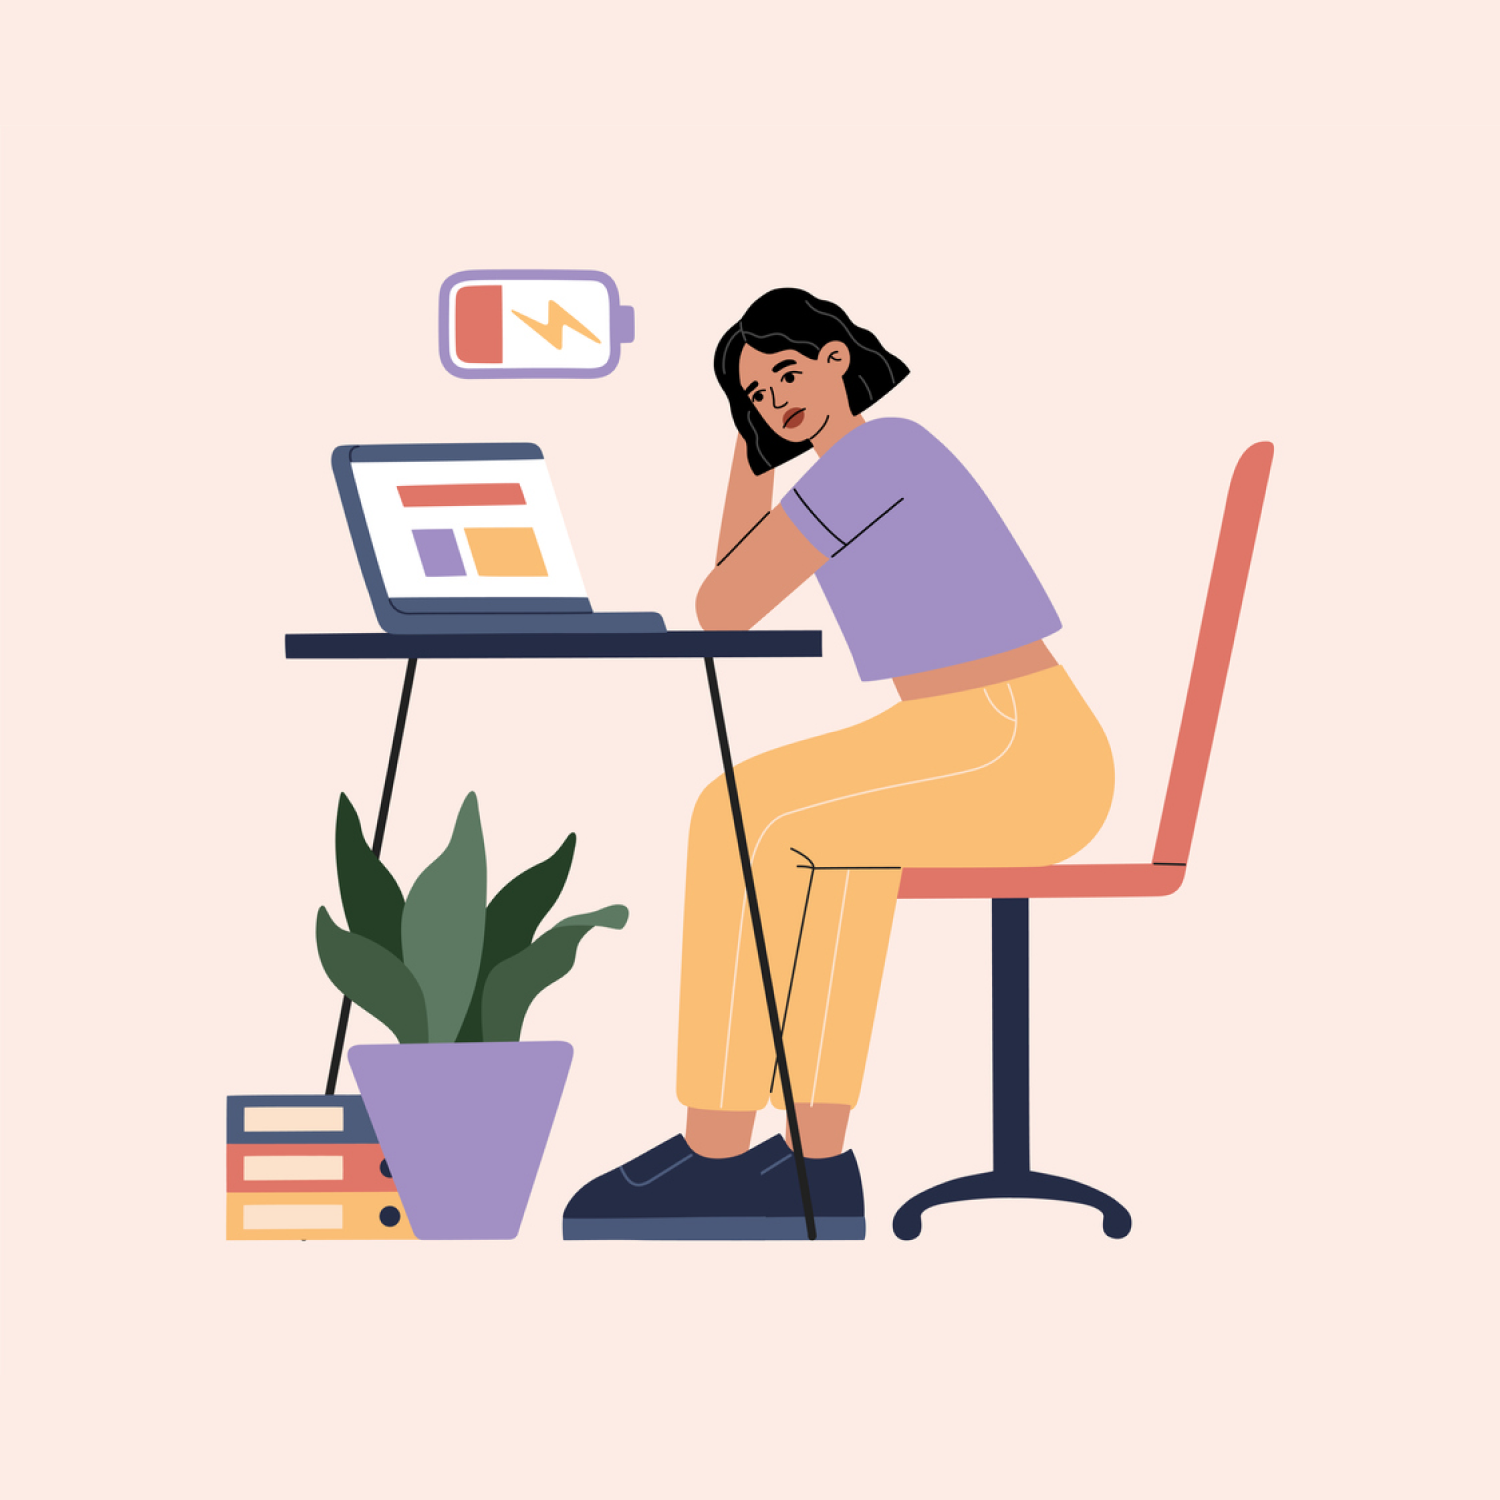 Illustration of woman dealing with burnout at work